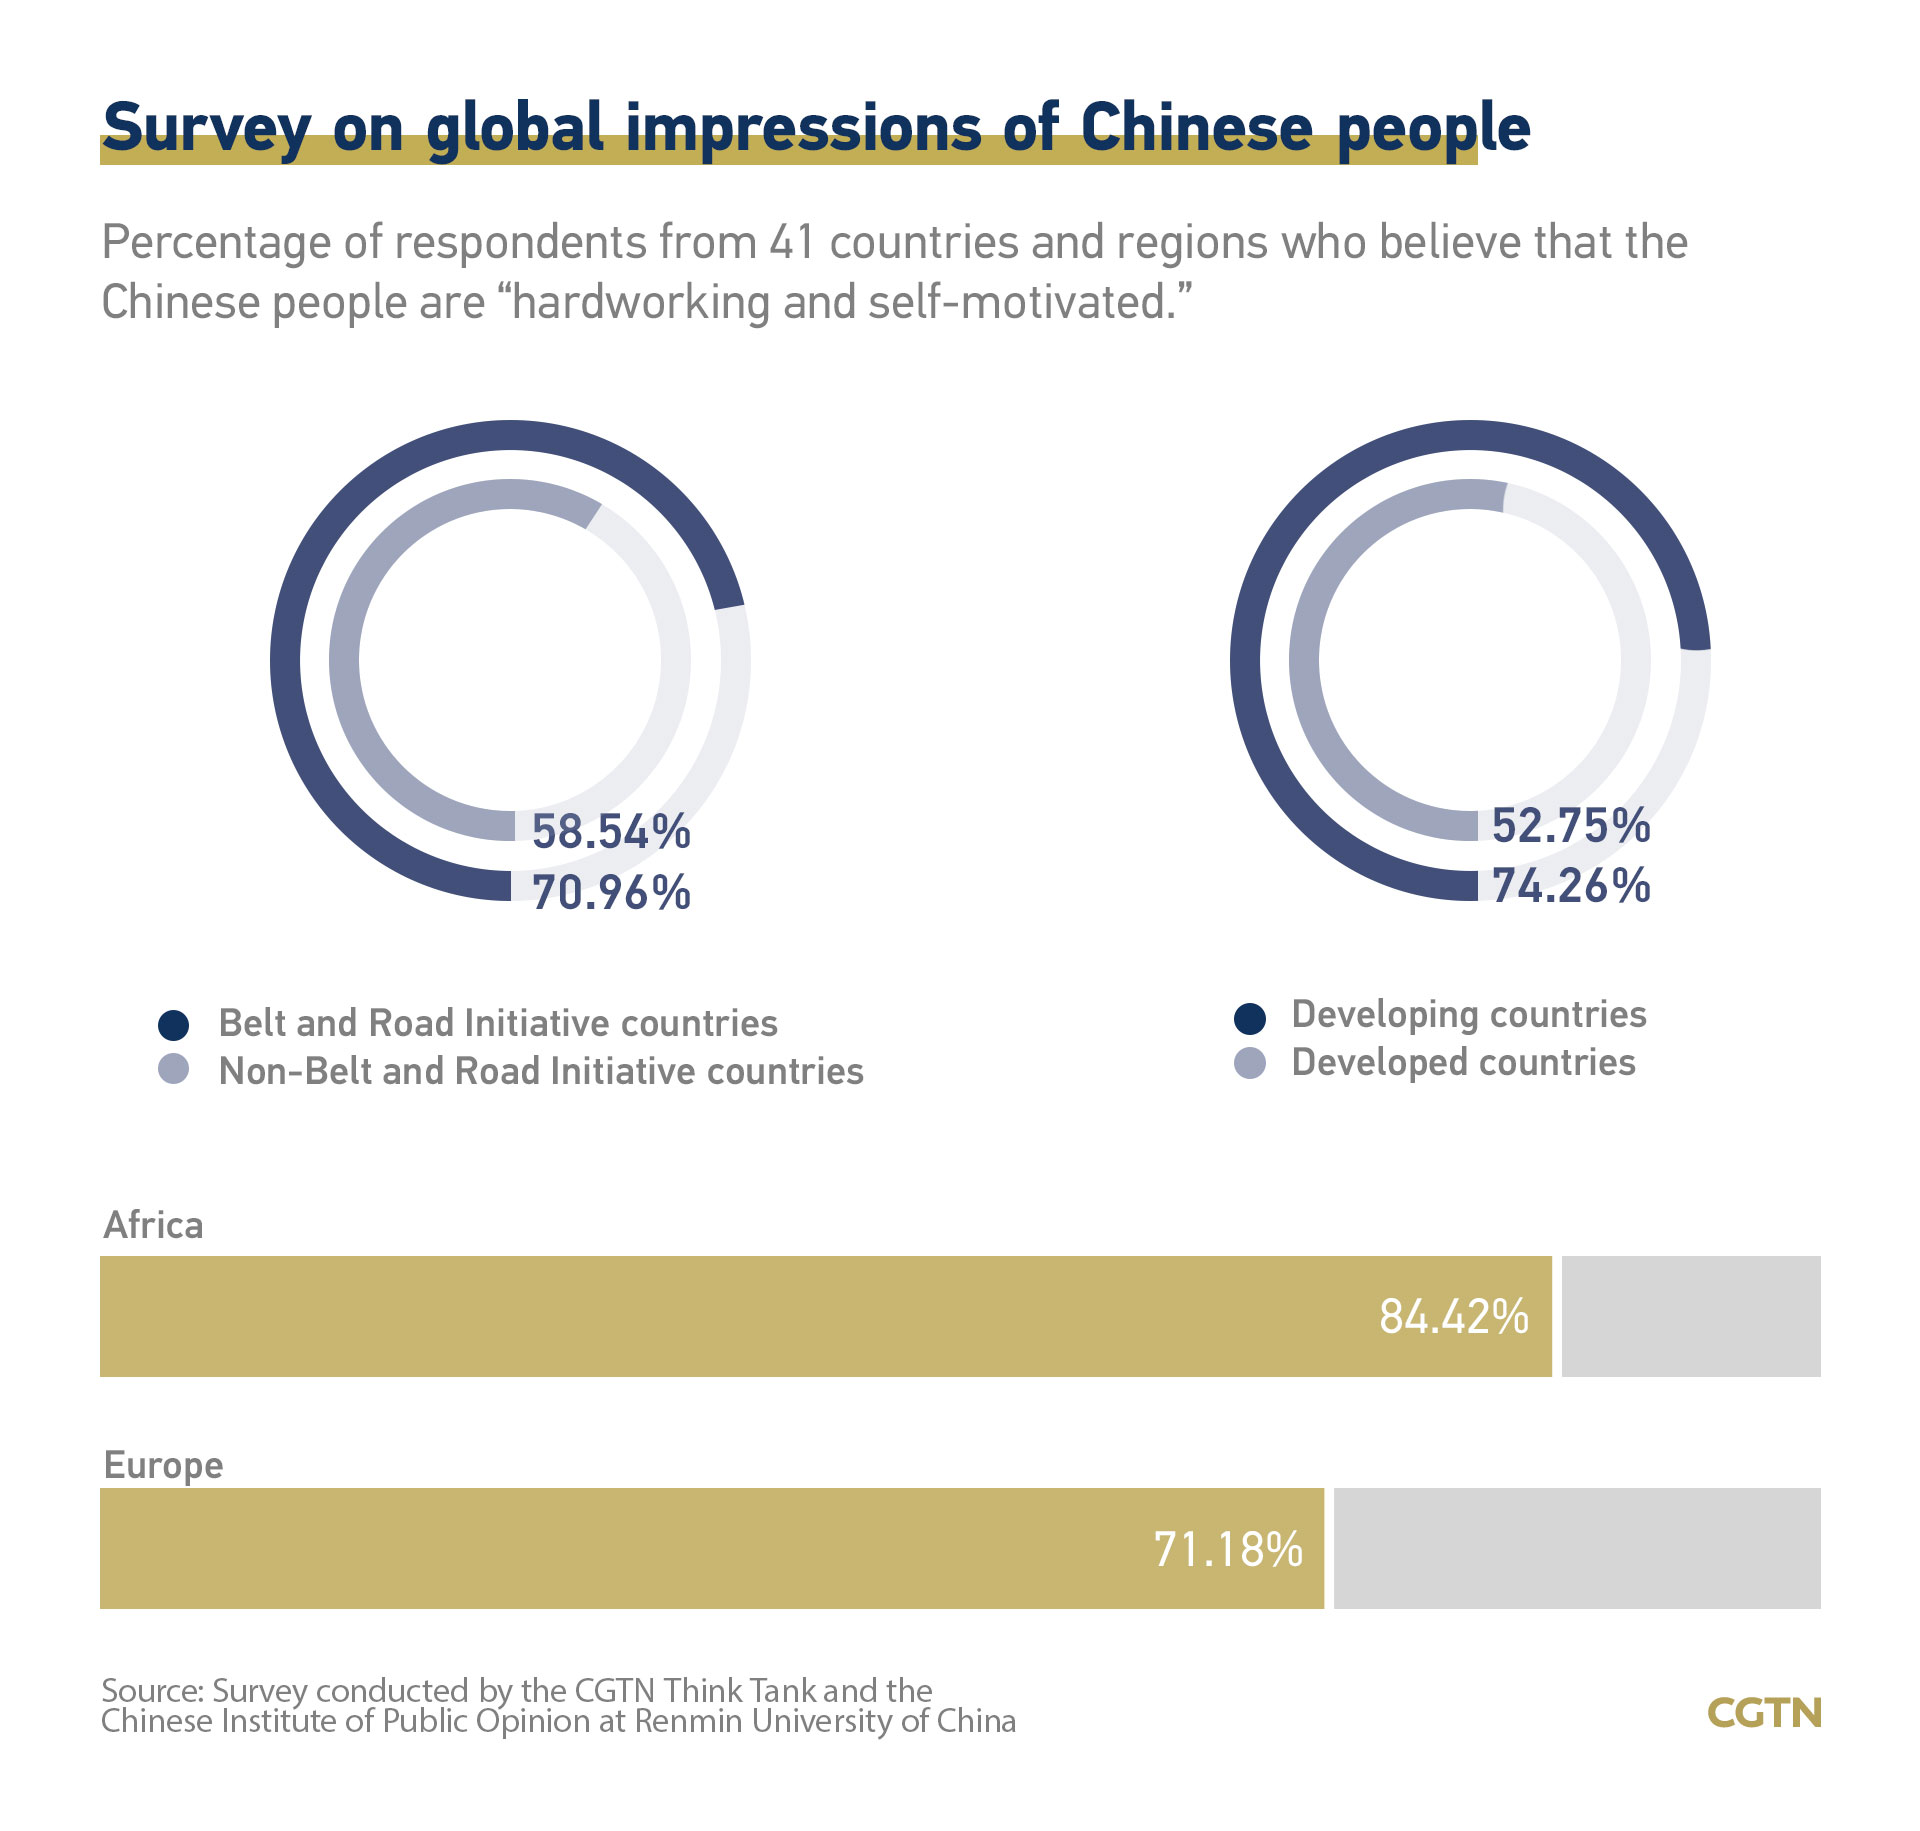 CGTN poll: Global respondents view Chinese as diligent, patriotic, confident